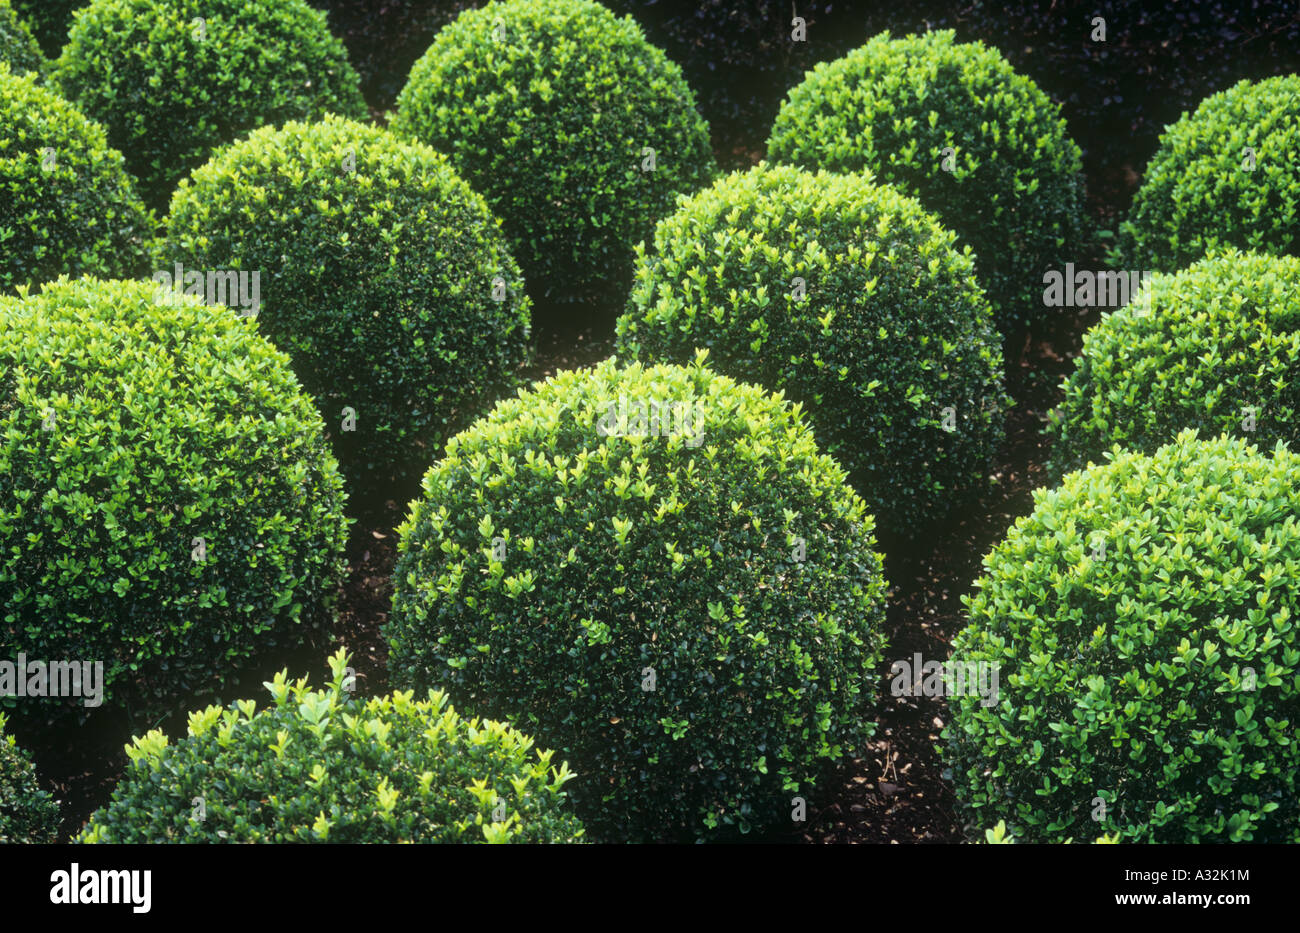 Mid-green Box or Buxus shrubs clipped into low spheres contrasting with deep purple of Barberry hedge or Berberis thunbergii Stock Photo